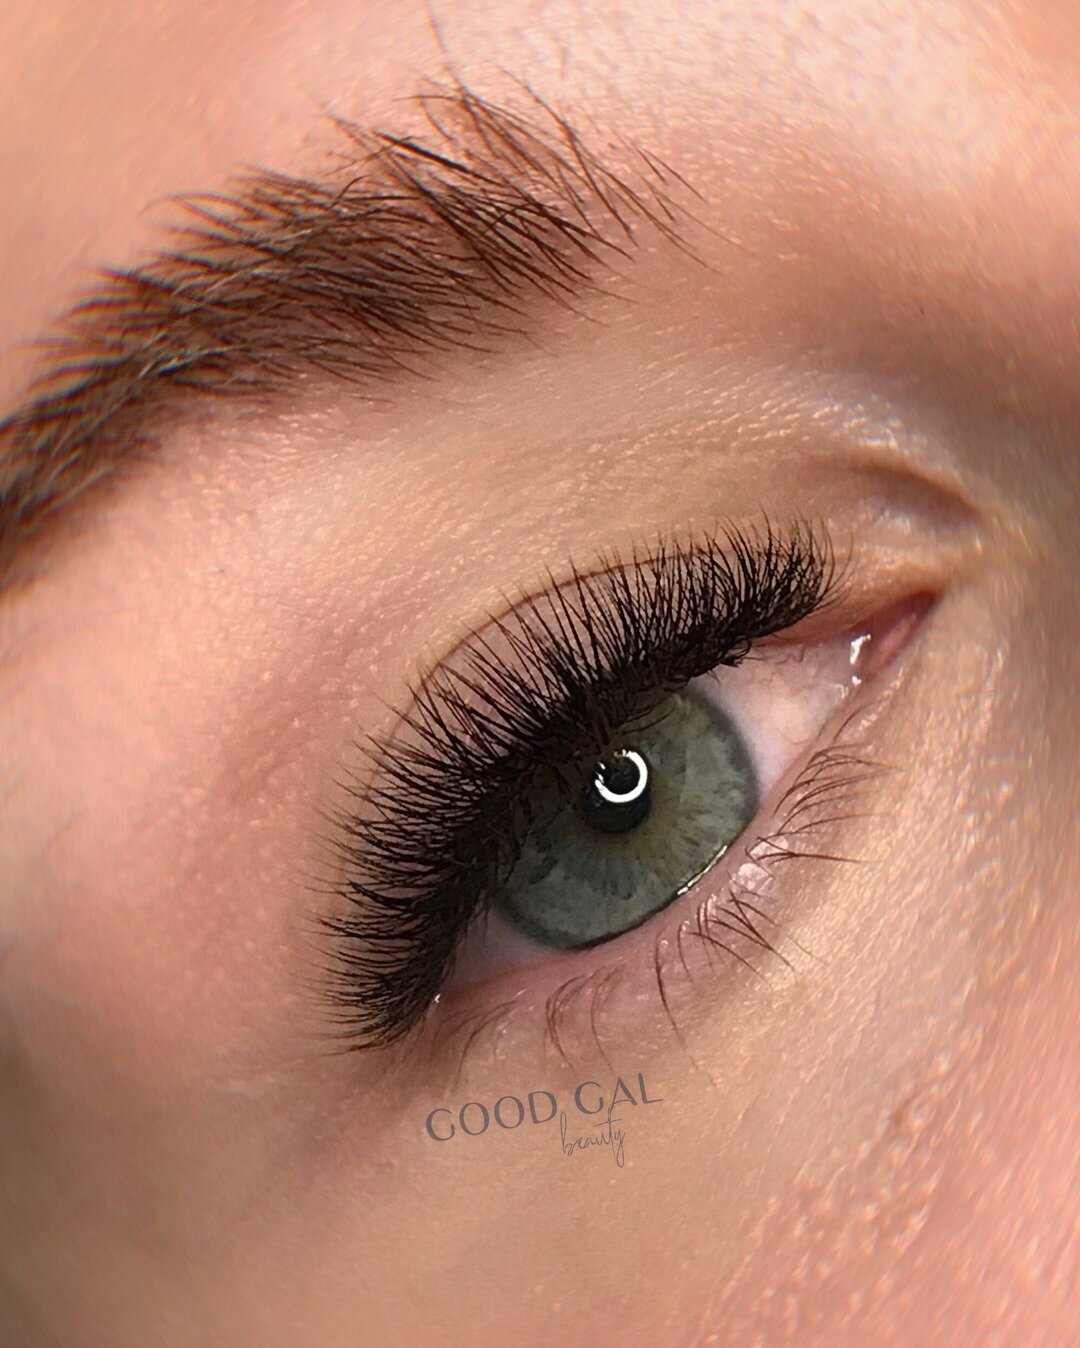 🖤 We always love a full liner look. ⠀⠀⠀⠀⠀⠀⠀⠀⠀
⠀⠀⠀⠀⠀⠀⠀⠀⠀
For all your booking needs please visit Goodgalbeauty.ca ⠀⠀⠀⠀⠀⠀⠀⠀⠀
⠀⠀⠀⠀⠀⠀⠀⠀⠀
&mdash;&mdash;&mdash;&mdash;&mdash;&mdash;&mdash;&mdash;&mdash;&mdash;&mdash;&mdash;&mdash;&mdash;&mdash;⠀⠀⠀⠀⠀⠀⠀⠀⠀
⠀